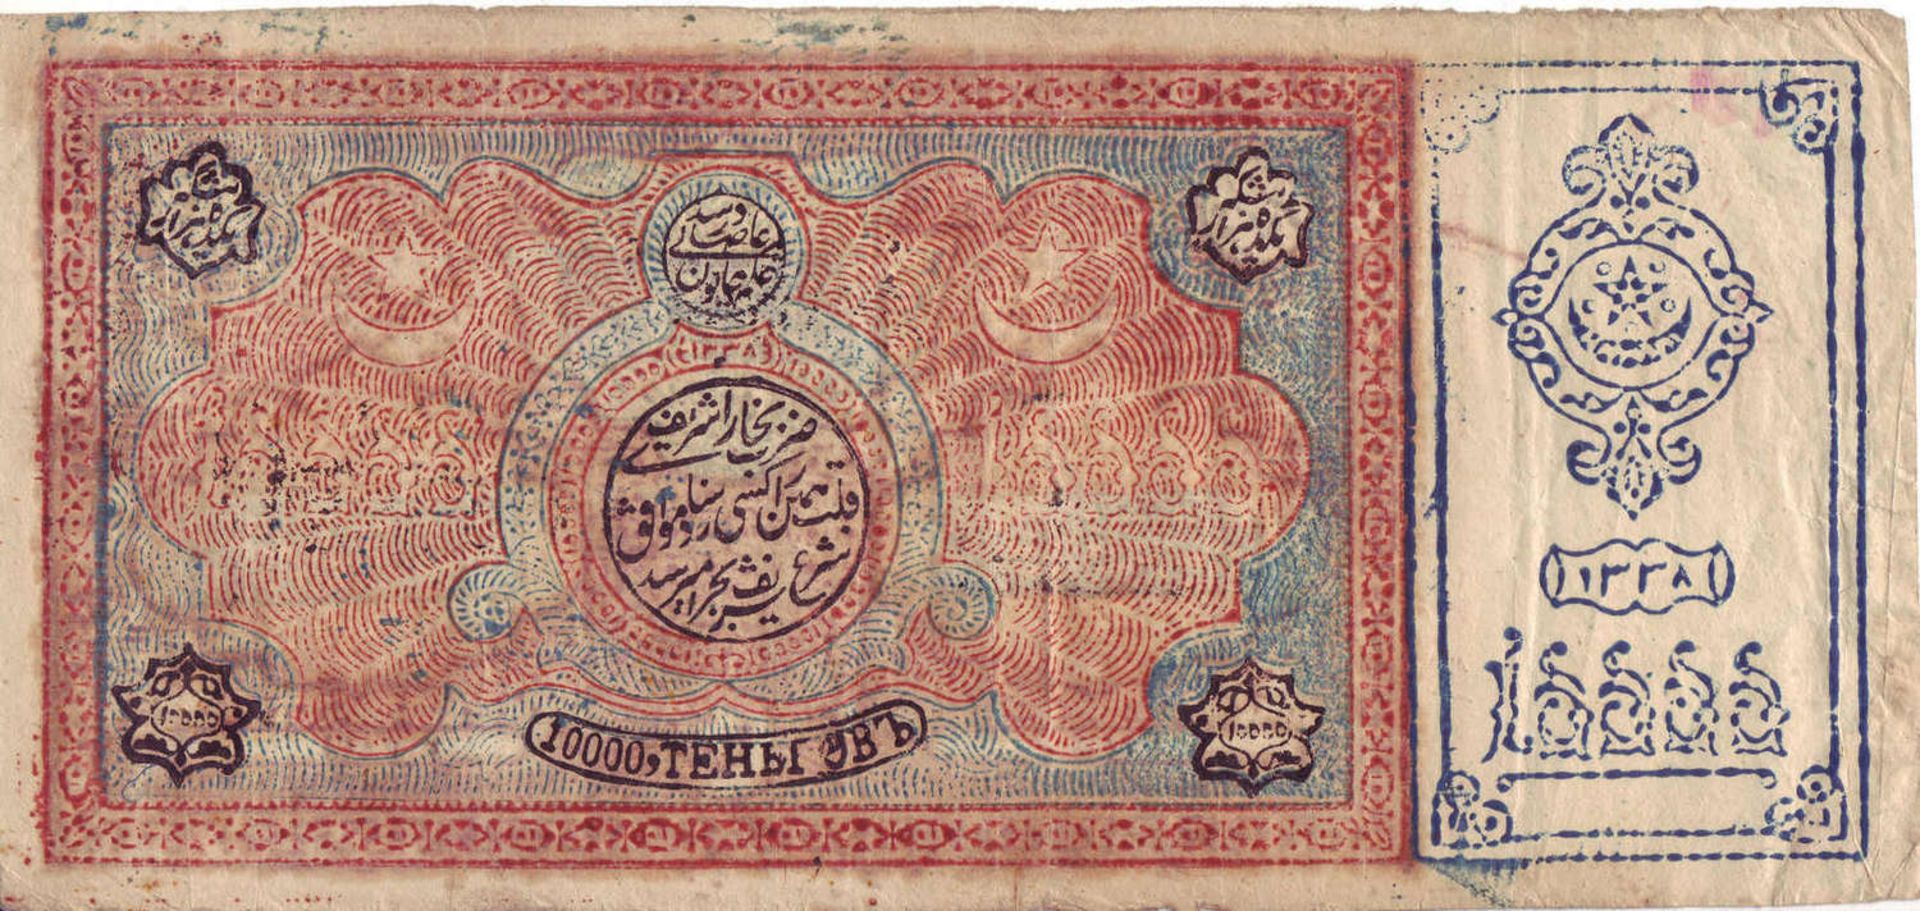 Russisch Zentralasien Bukhara 1920, 10.000 Tengas - Banknote. Ra 34a.Russian Central Asia Bukhara